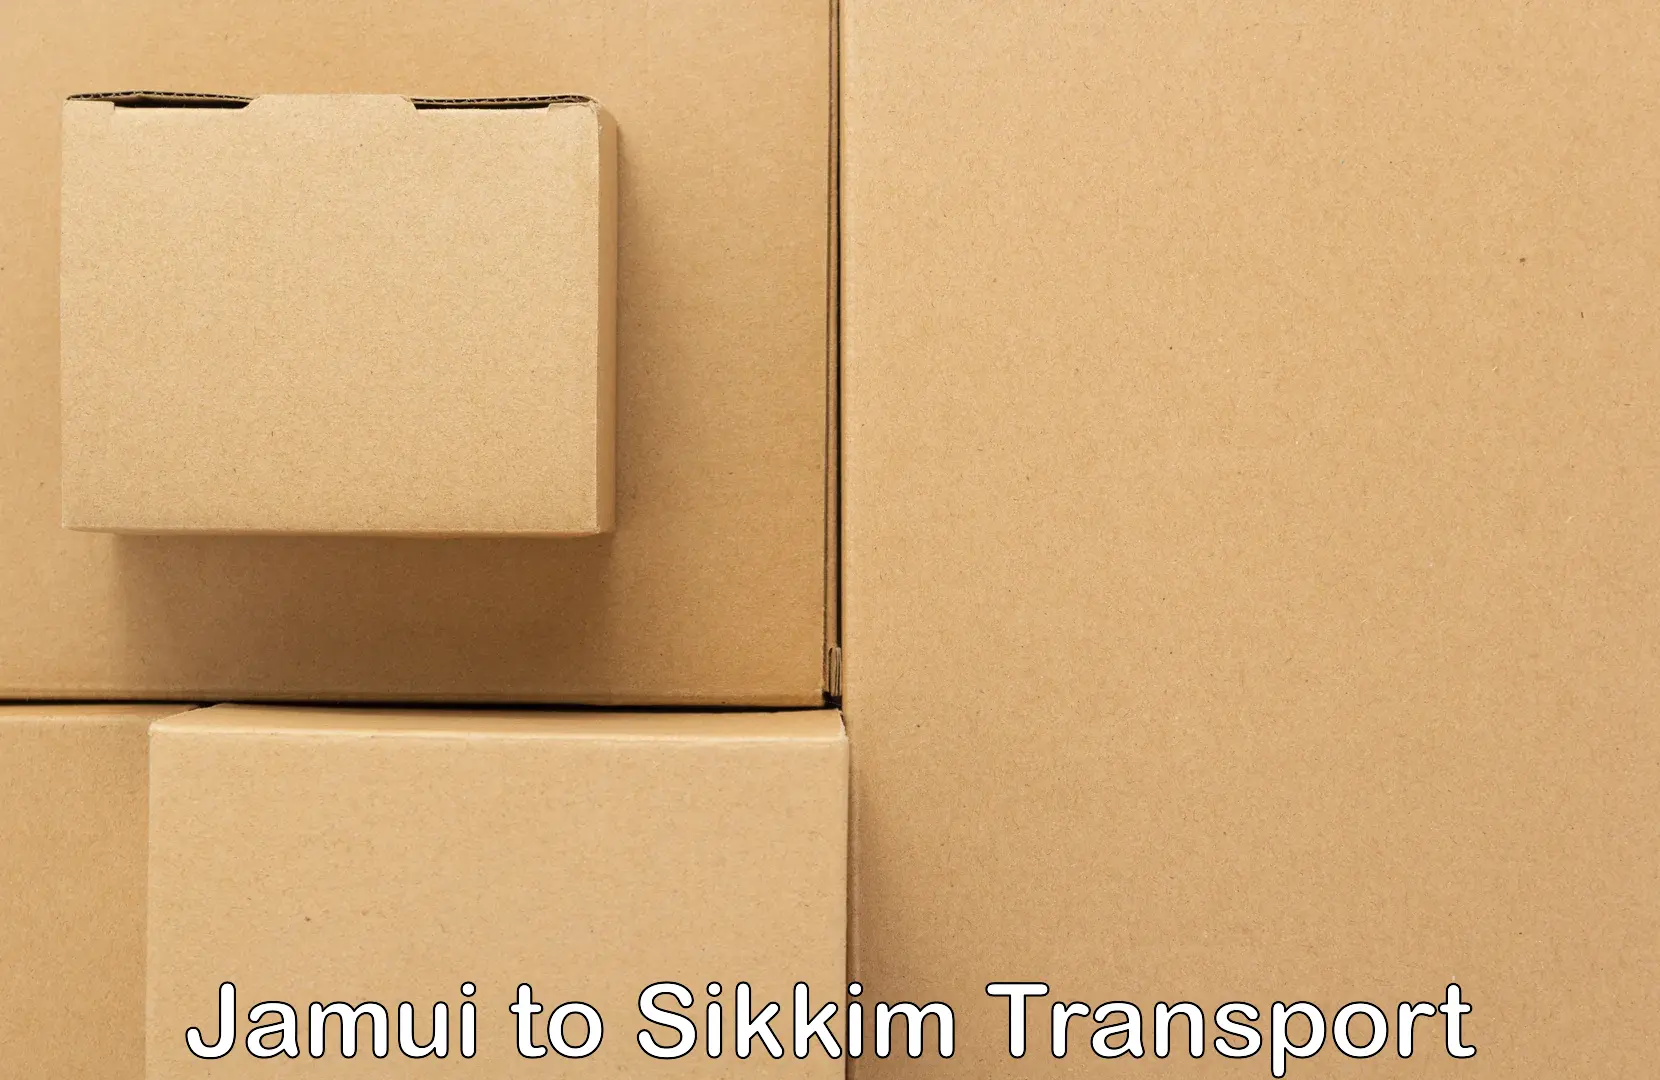 Commercial transport service Jamui to Sikkim